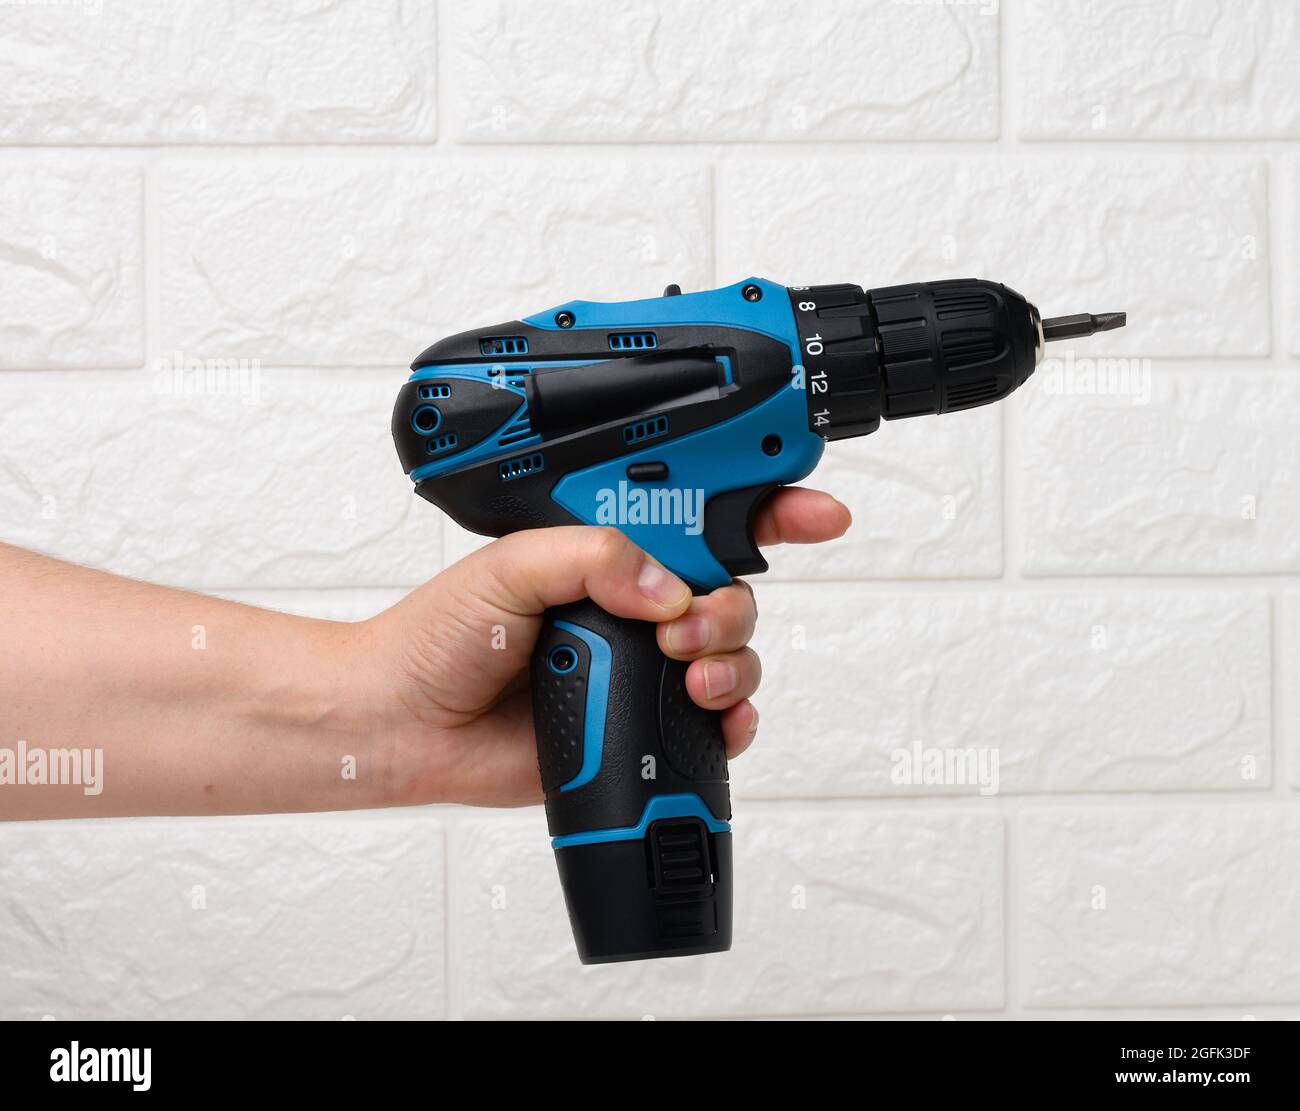 https://c8.alamy.com/comp/2GFK3DF/hand-in-a-textile-glove-holds-a-portable-drill-on-a-battery-against-a-background-of-a-white-brick-wall-2GFK3DF.jpg